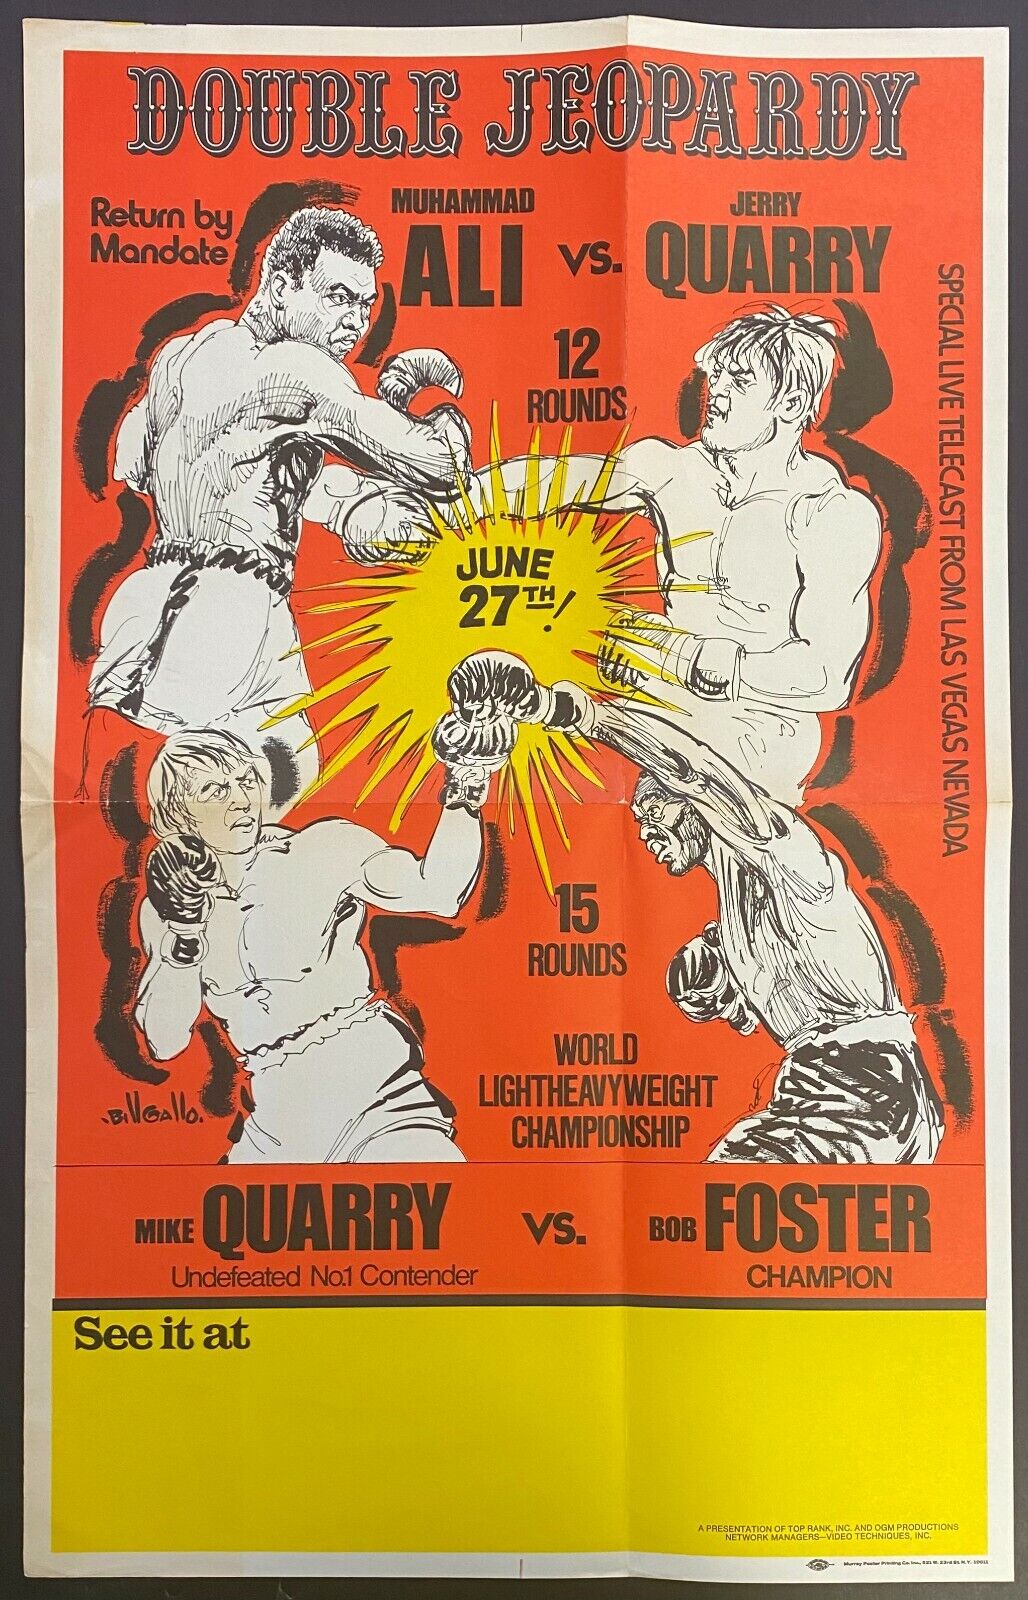 1972 Vintage Boxing Muhammad Ali Jerry Quarry Double Jeopardy Promotional Poster